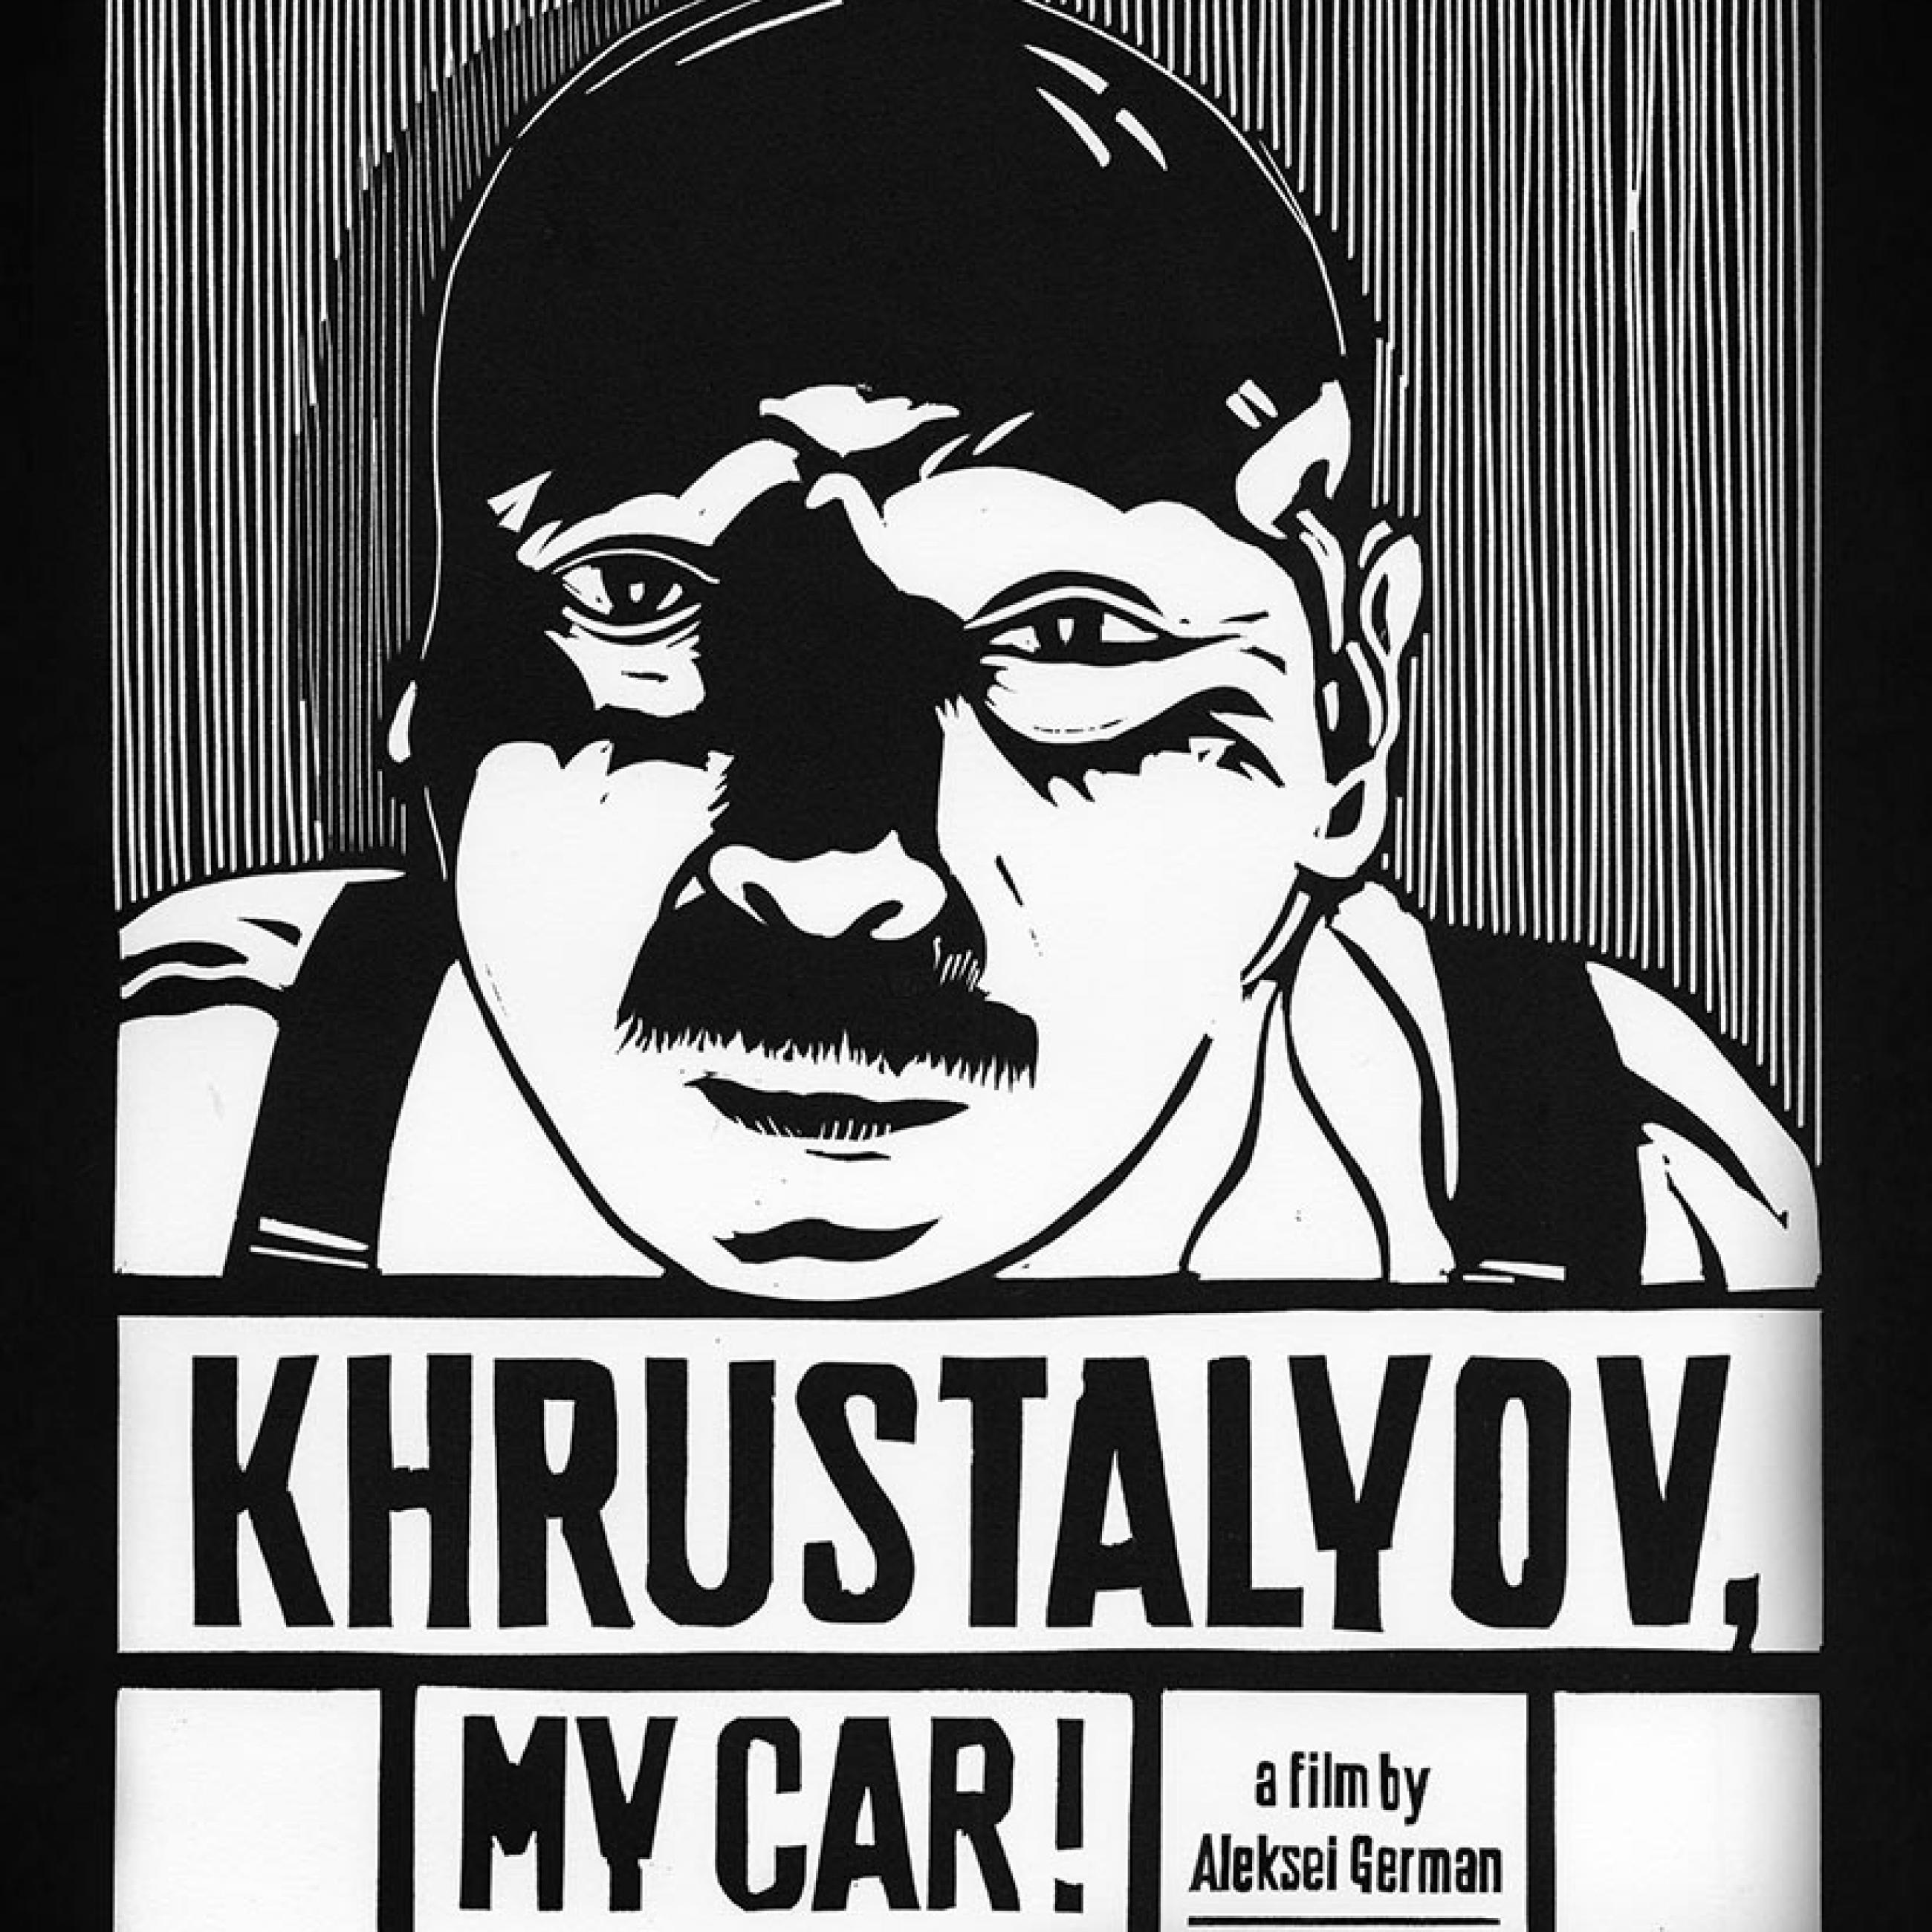 black and white movie poster depicting a cartoon image of an older man with a moustache 